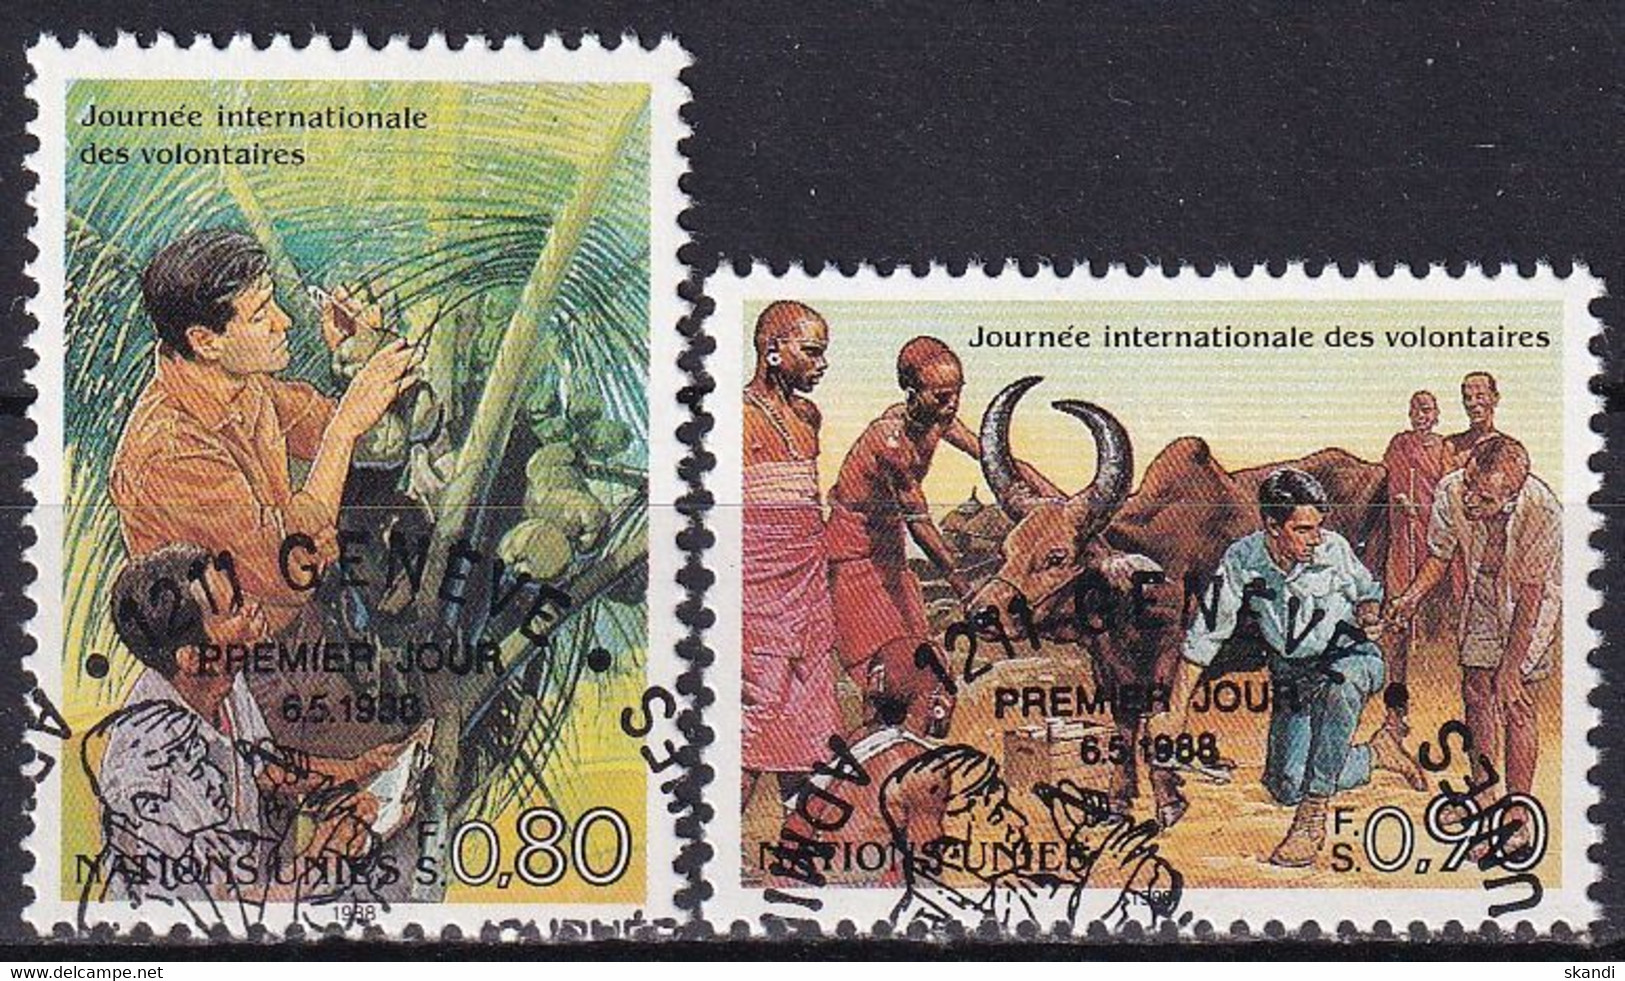 UNO GENF 1988 Mi-Nr. 167/68 O Used - Aus Abo - Used Stamps